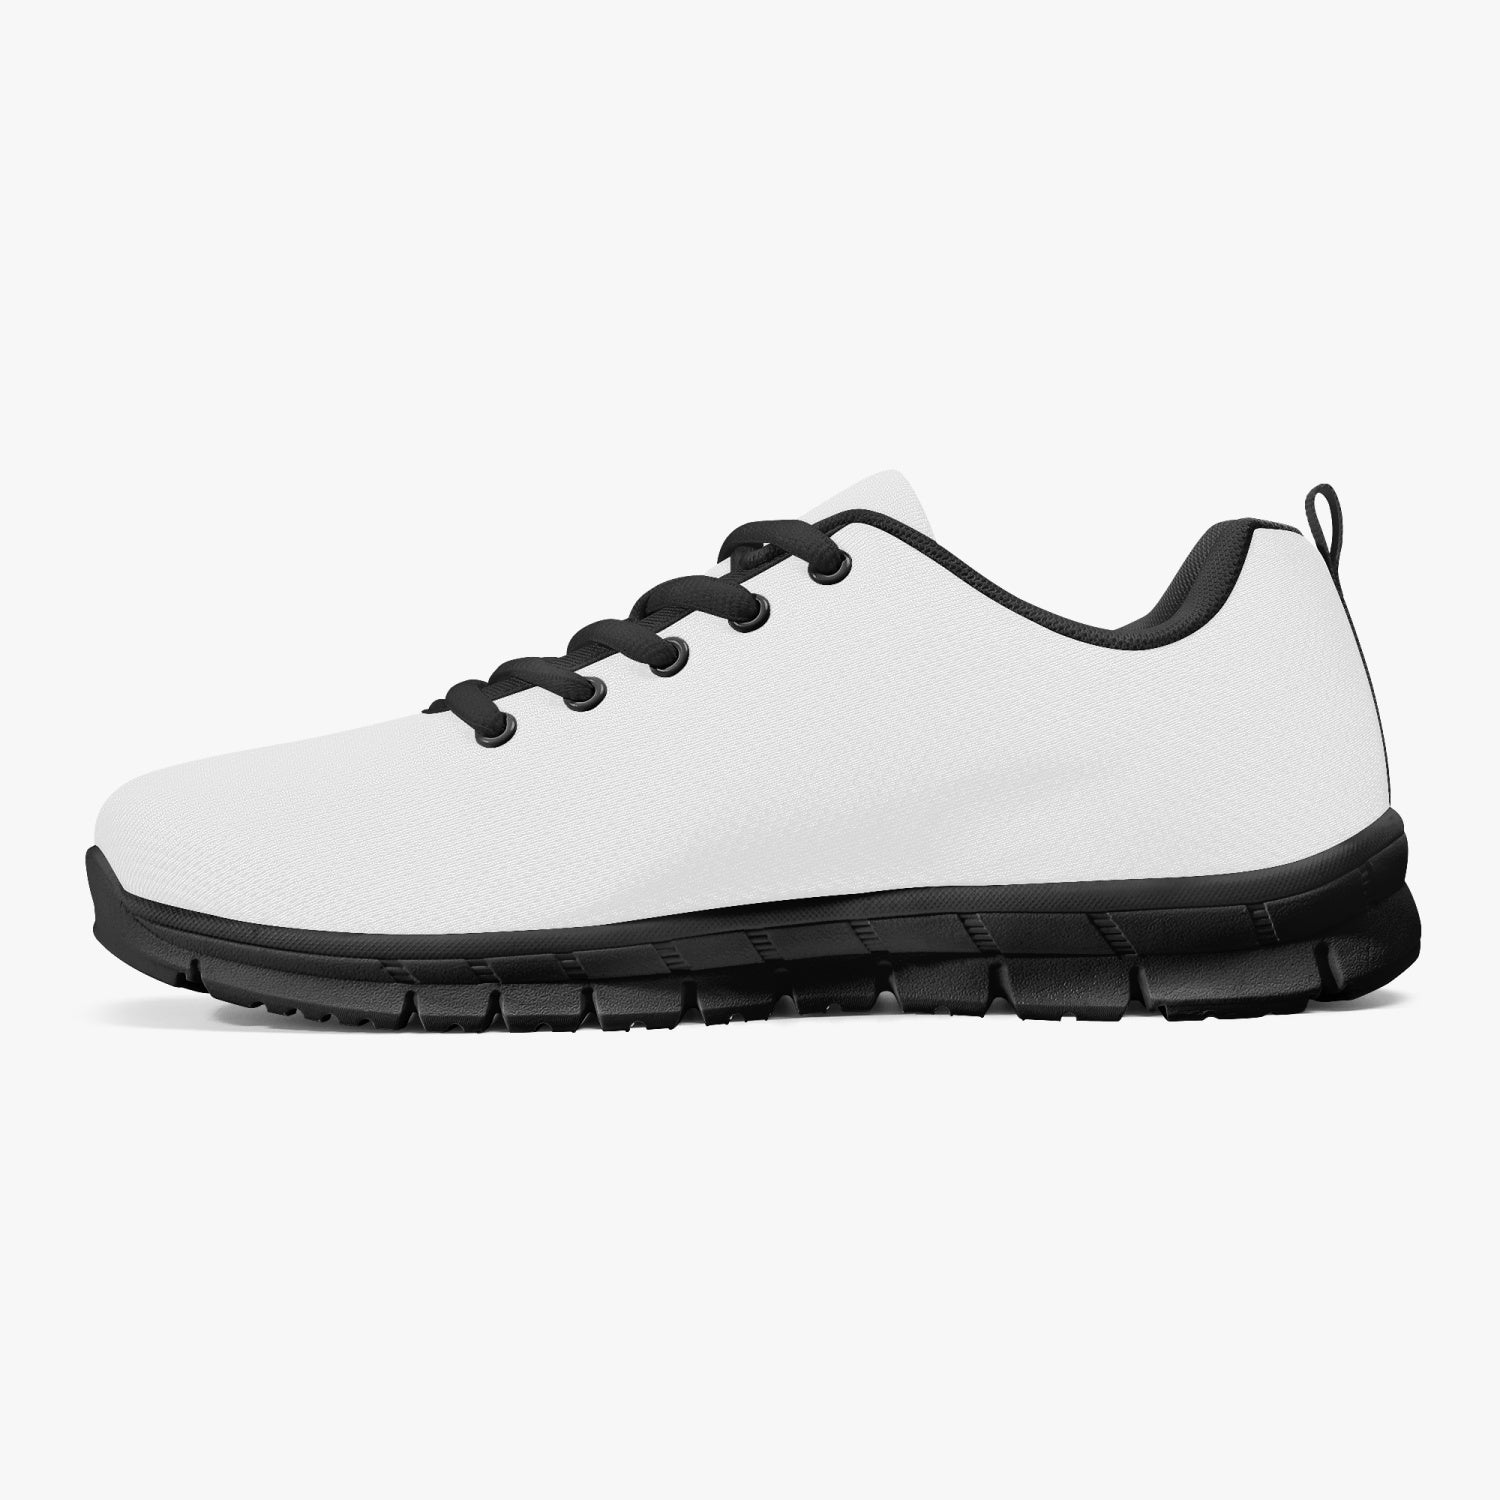 ithil Classic Lightweight Mesh Sneakers - White/Black